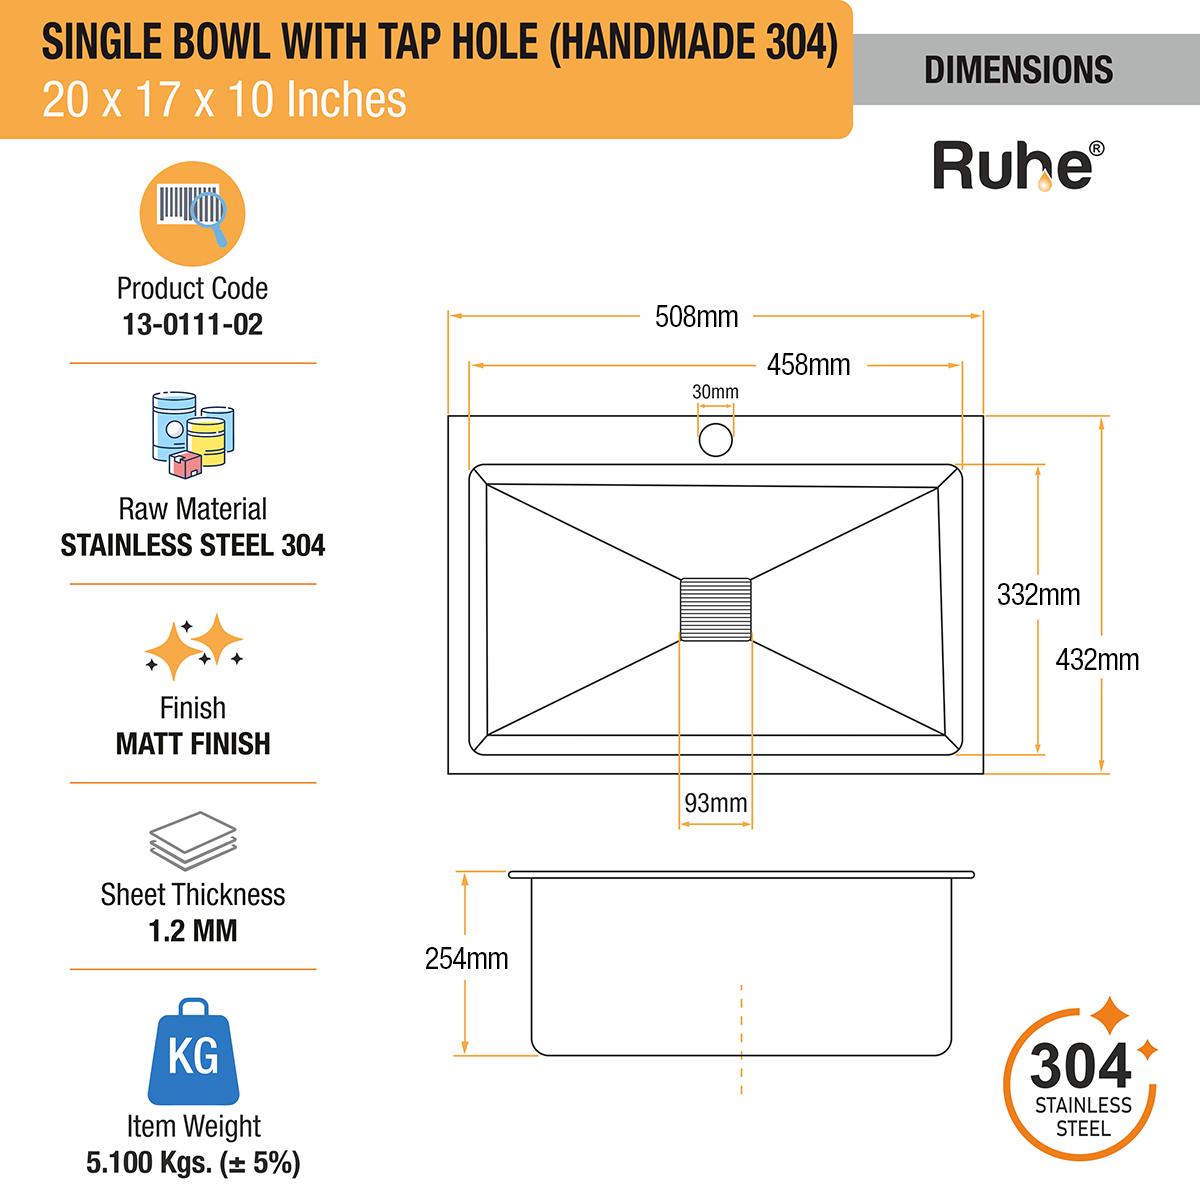 Handmade Single Bowl 304-Grade Kitchen Sink (20 x 17 x 10 Inches) with Tap Hole dimensions and sizes